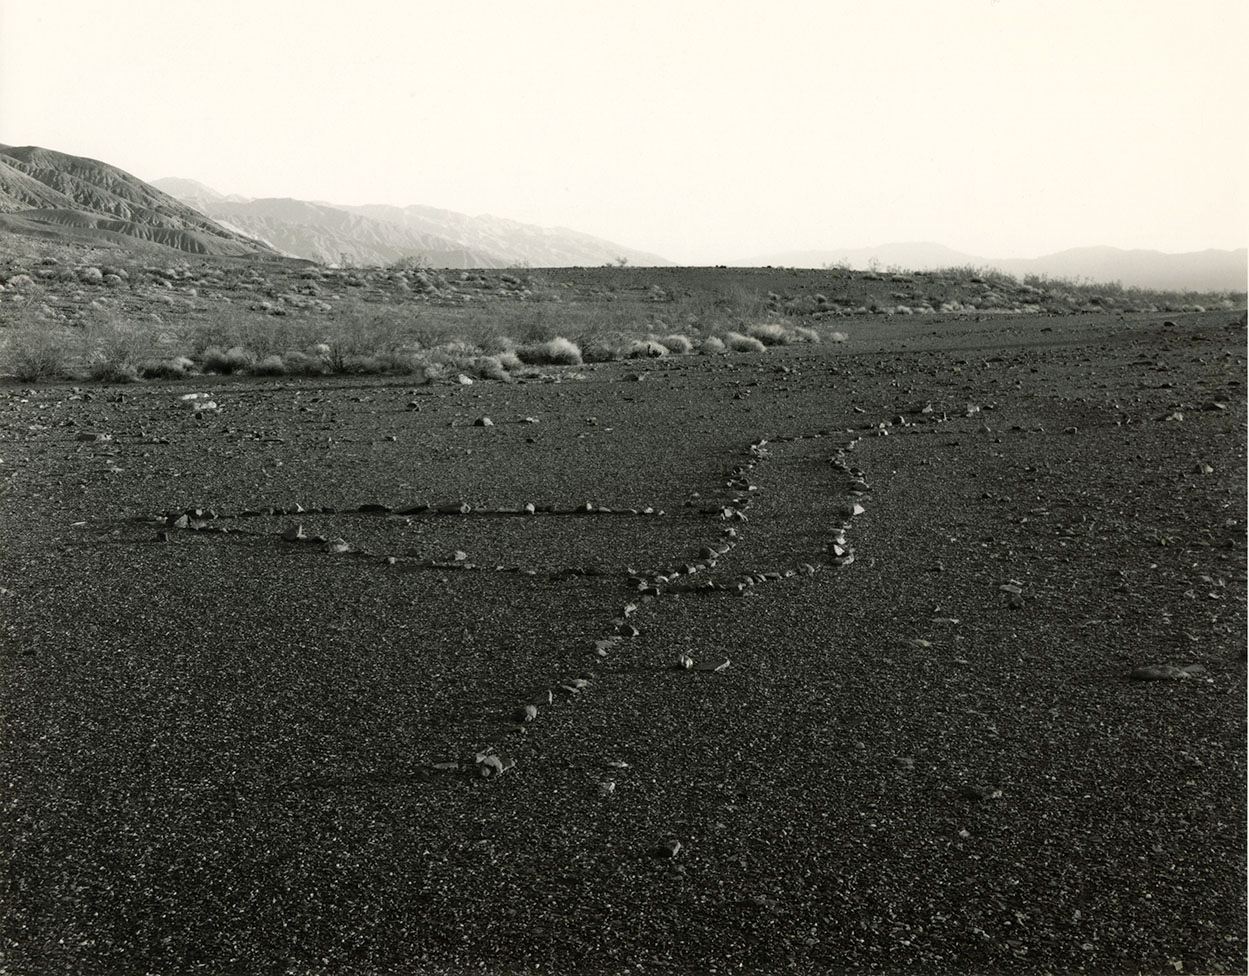     Mark Ruwedel, Panamint Valley: An Ancient Rock Alignment, 2000 Courtesy of the artist, Gallery Luisotti and Art 45 

